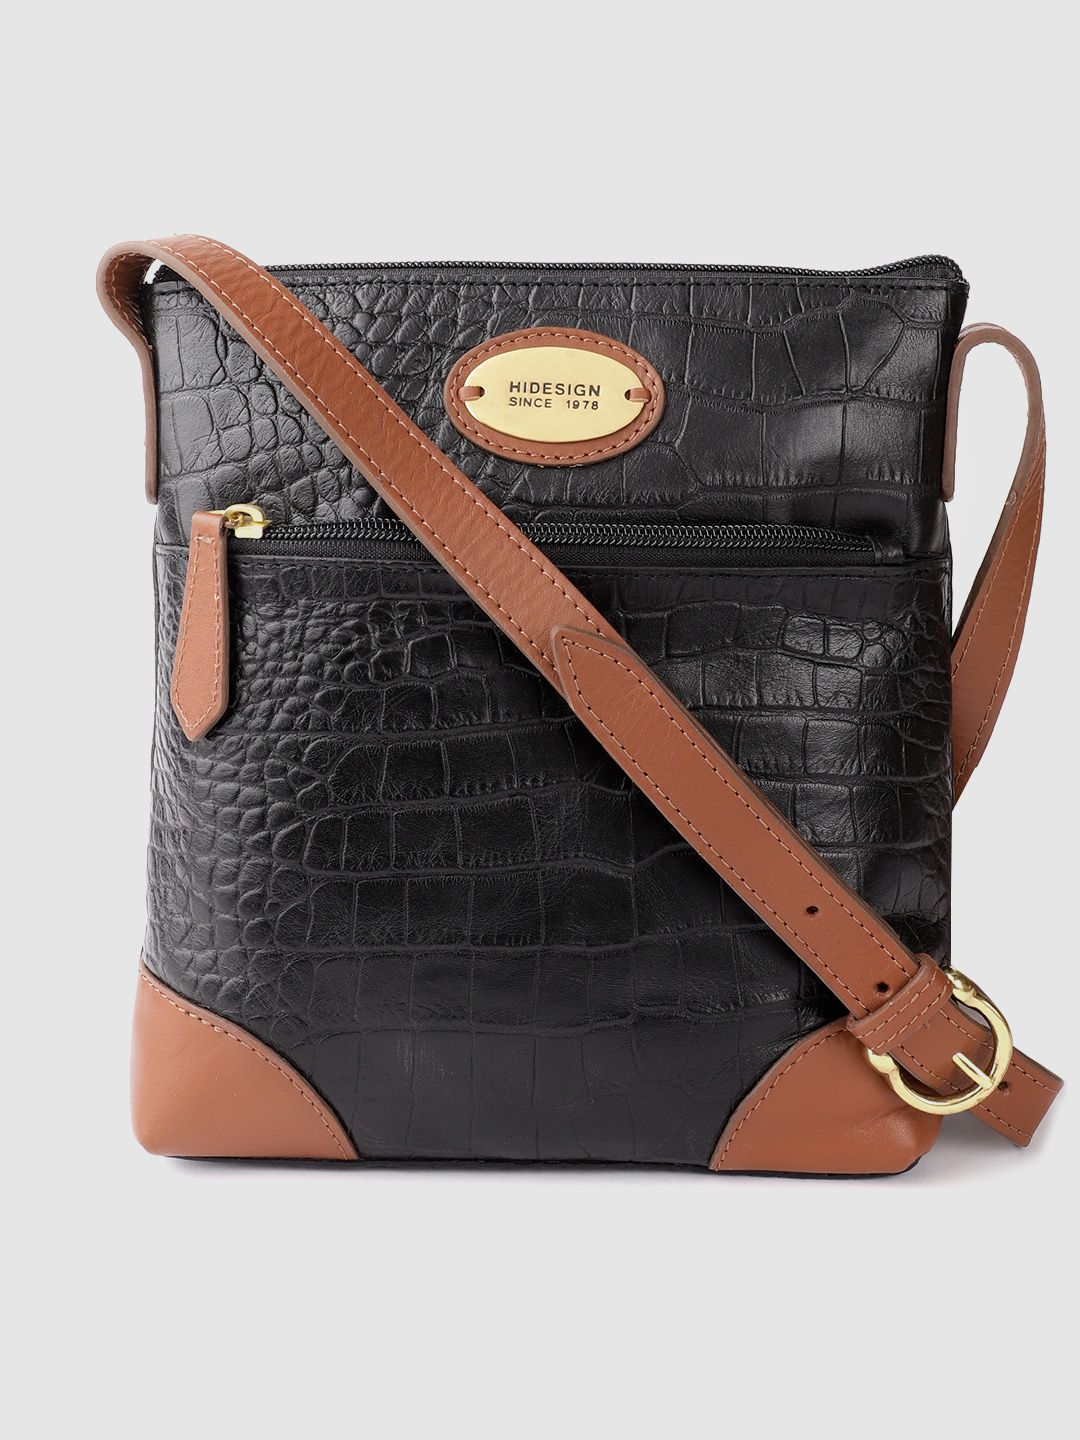 Hidesign Black Croc Textured Leather Handcrafted Structured Sling Bag Price in India